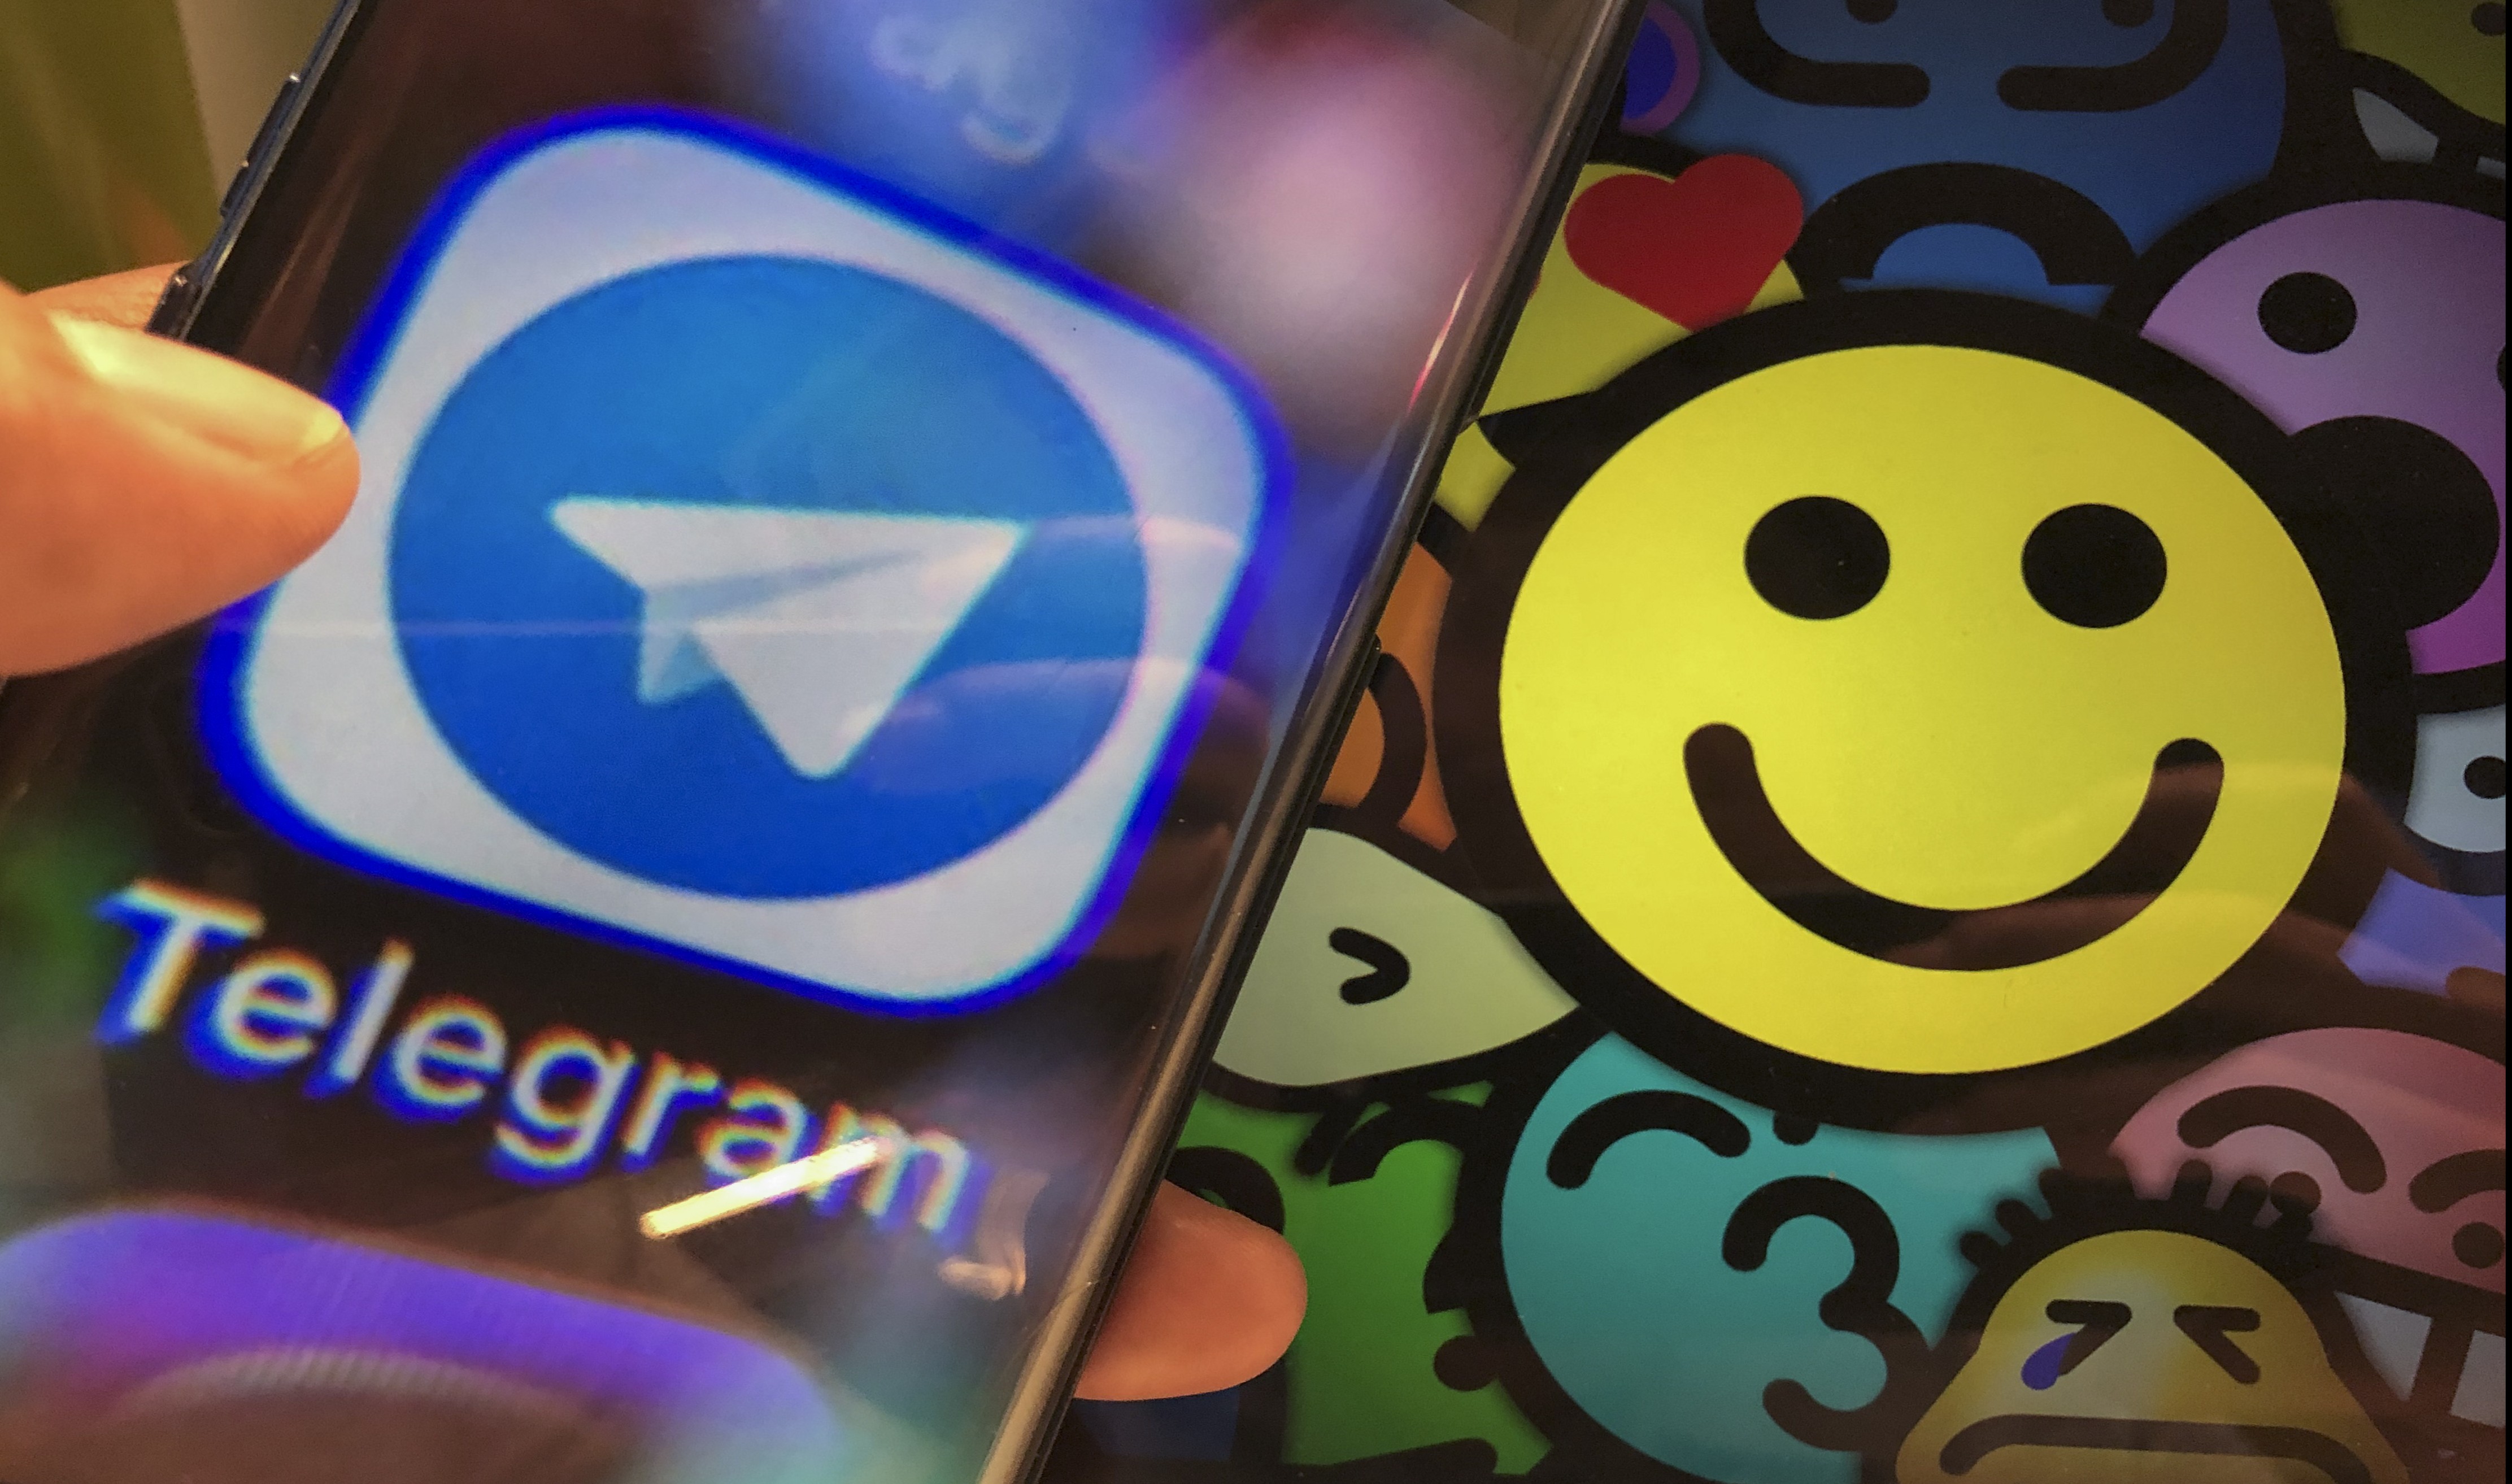 Telegram is an encrypted messaging app popular with protesters. Photo: SCMP